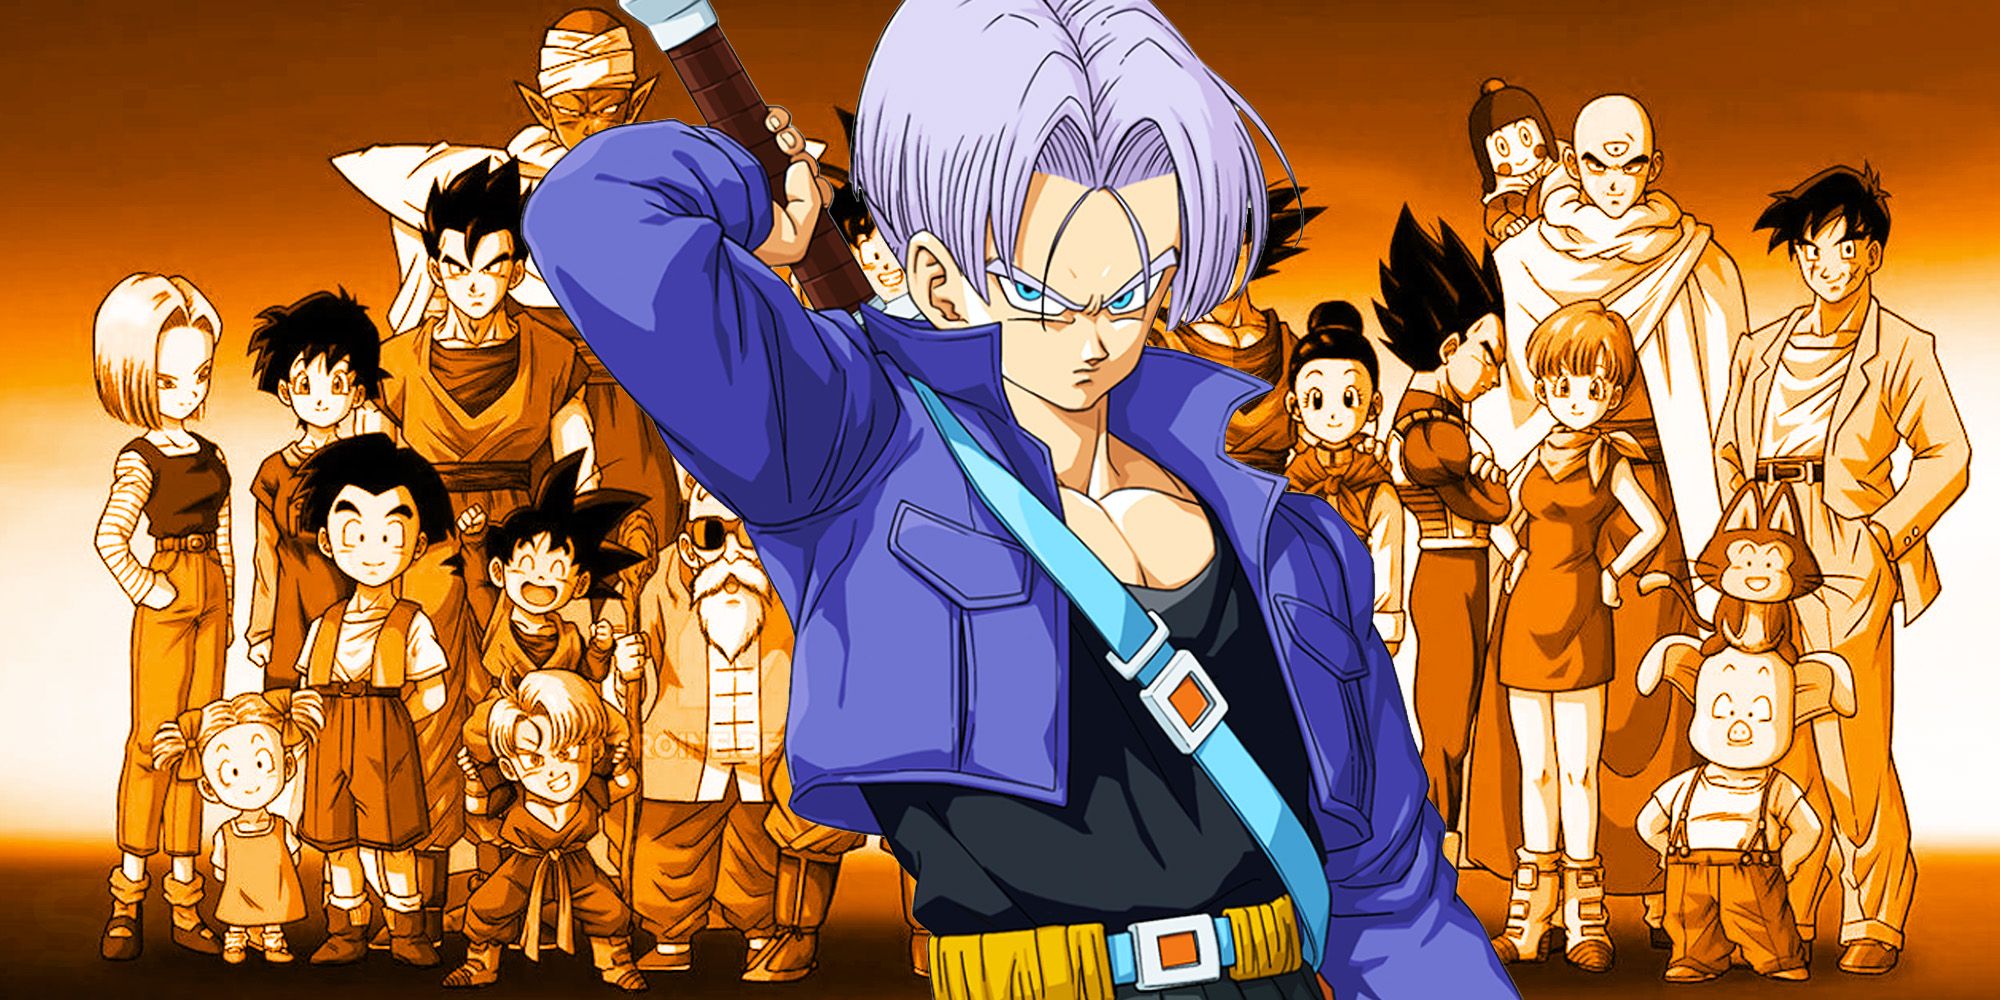 Dragon ball z Future trunks compared to other z warriors